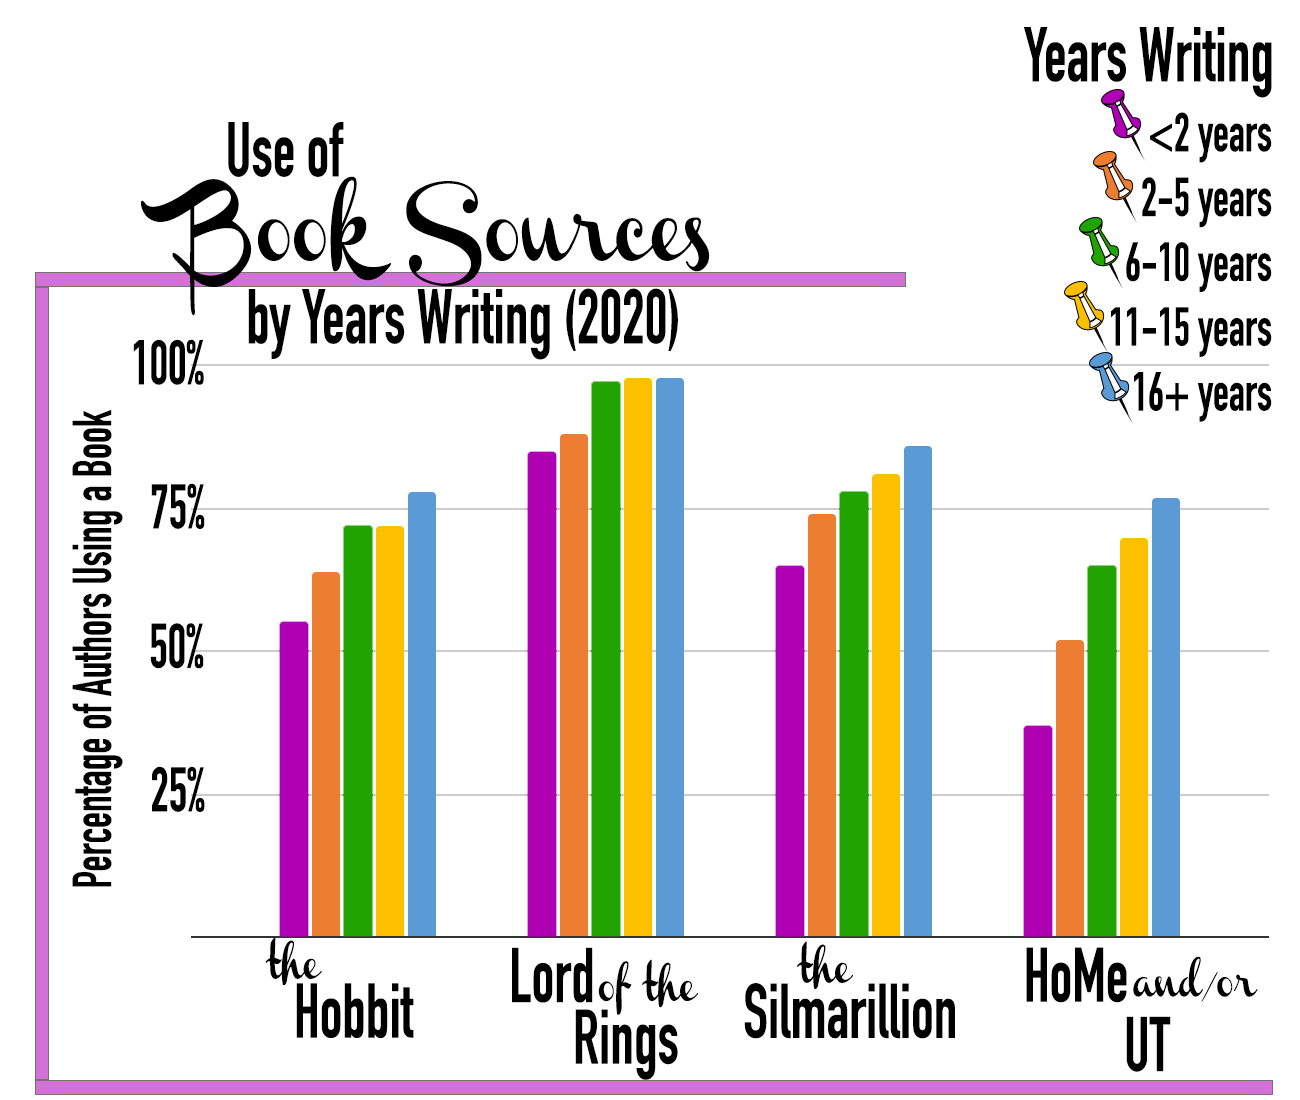 2020 survey results show what percentage of authors used the various books for writing fanfiction, based on the number of years they have been writing—less than 2 years, 2 to 5 years, 6 to 10 years, 11 to 15 years, and 16 years or more. For all five books considered—The Hobbit, The Lord of the Rings, The Silmarillion, Unfinished Tales, and the History of Middle-earth series—use of that book increases as fans remain longer in the fandom.